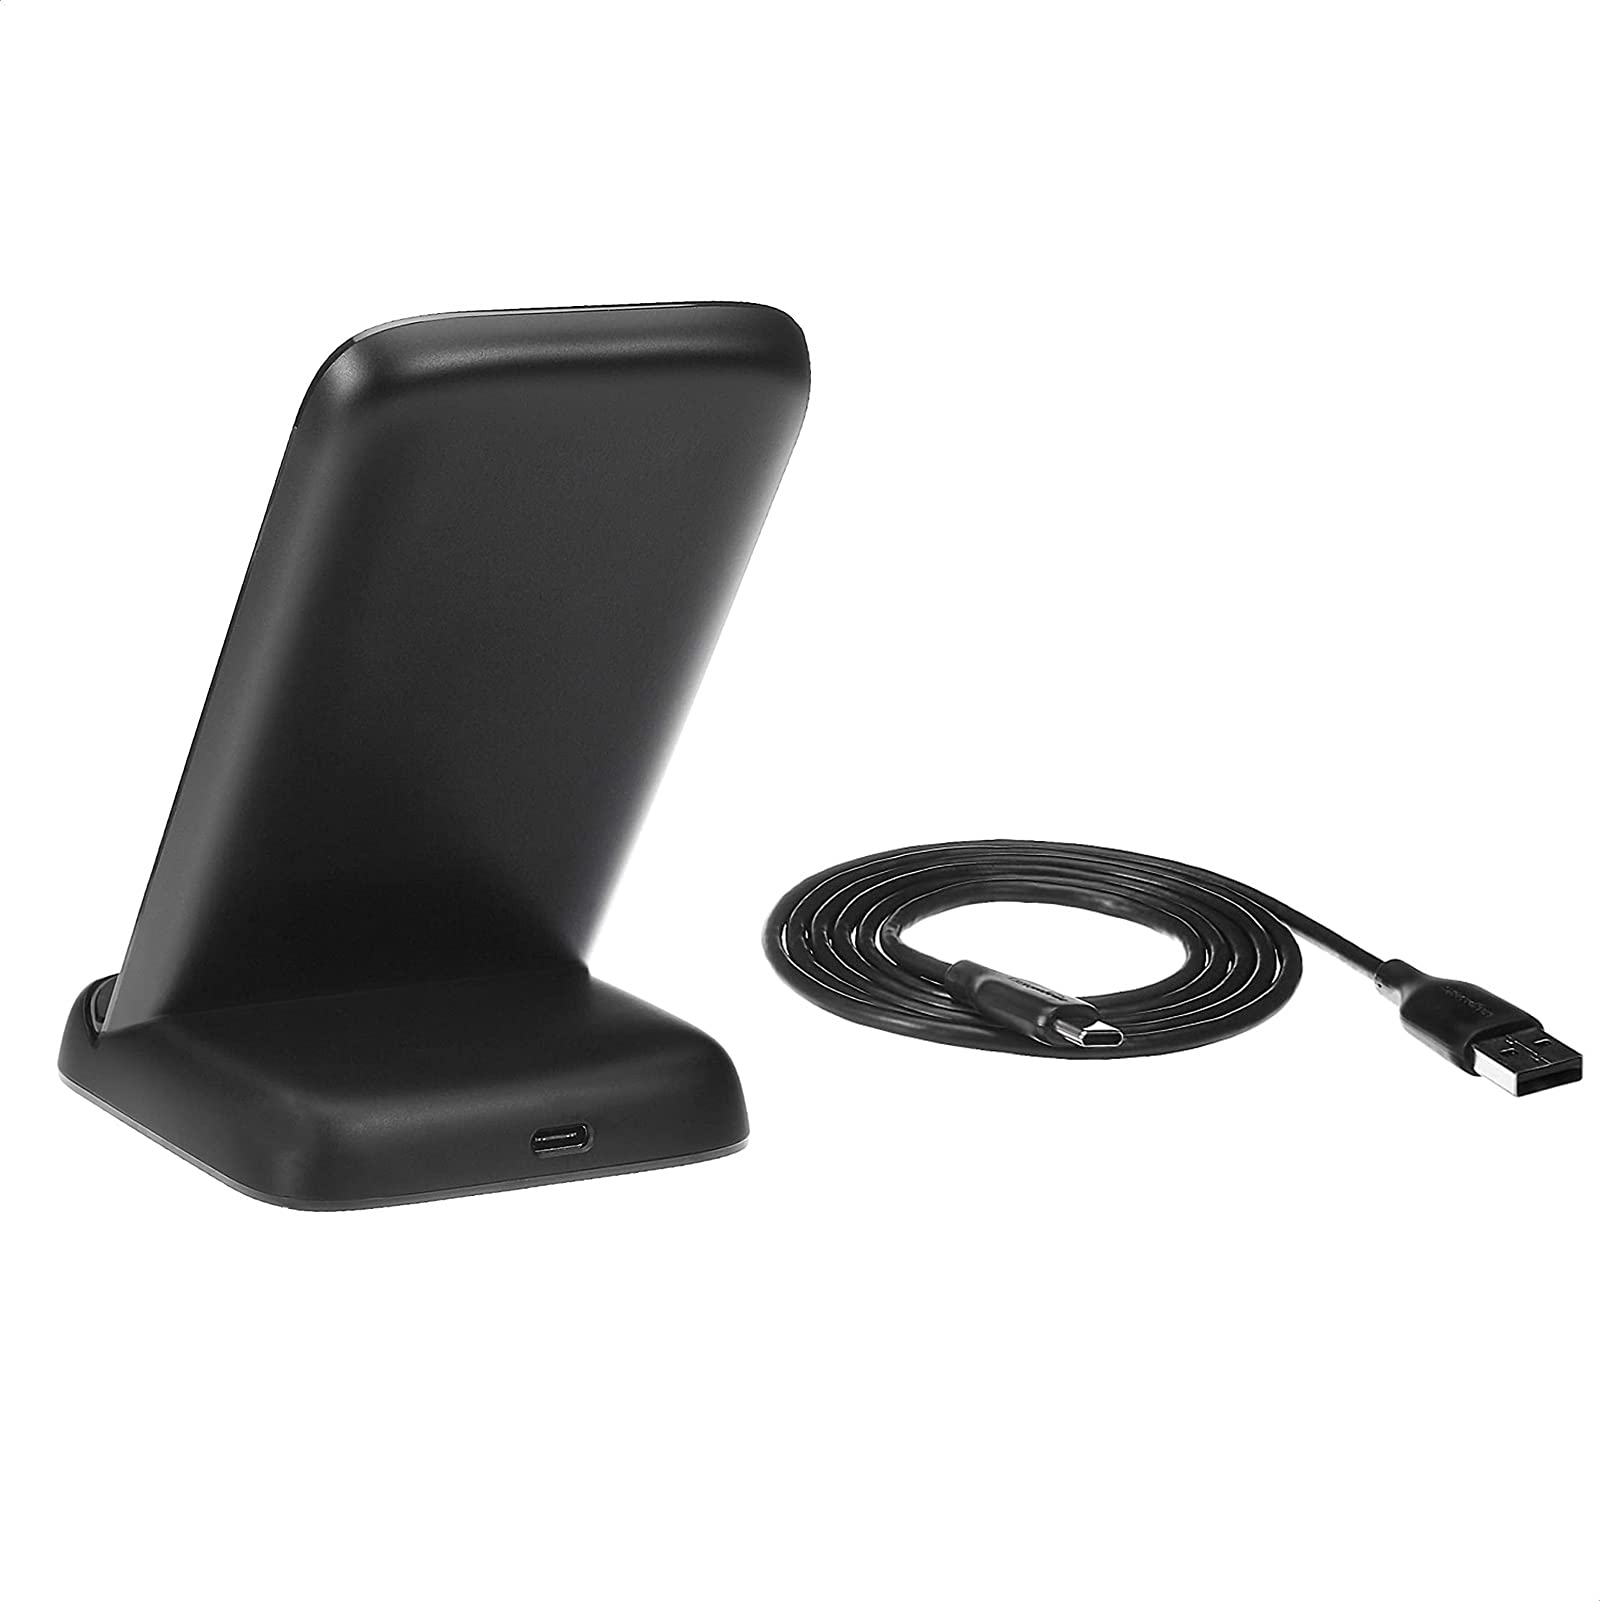 Amazon Basics 10W Qi Certified Wireless Charging Stand (iPhone 14/13/12/11/X, Samsung) - with USB Cable (No AC Adapter), Black